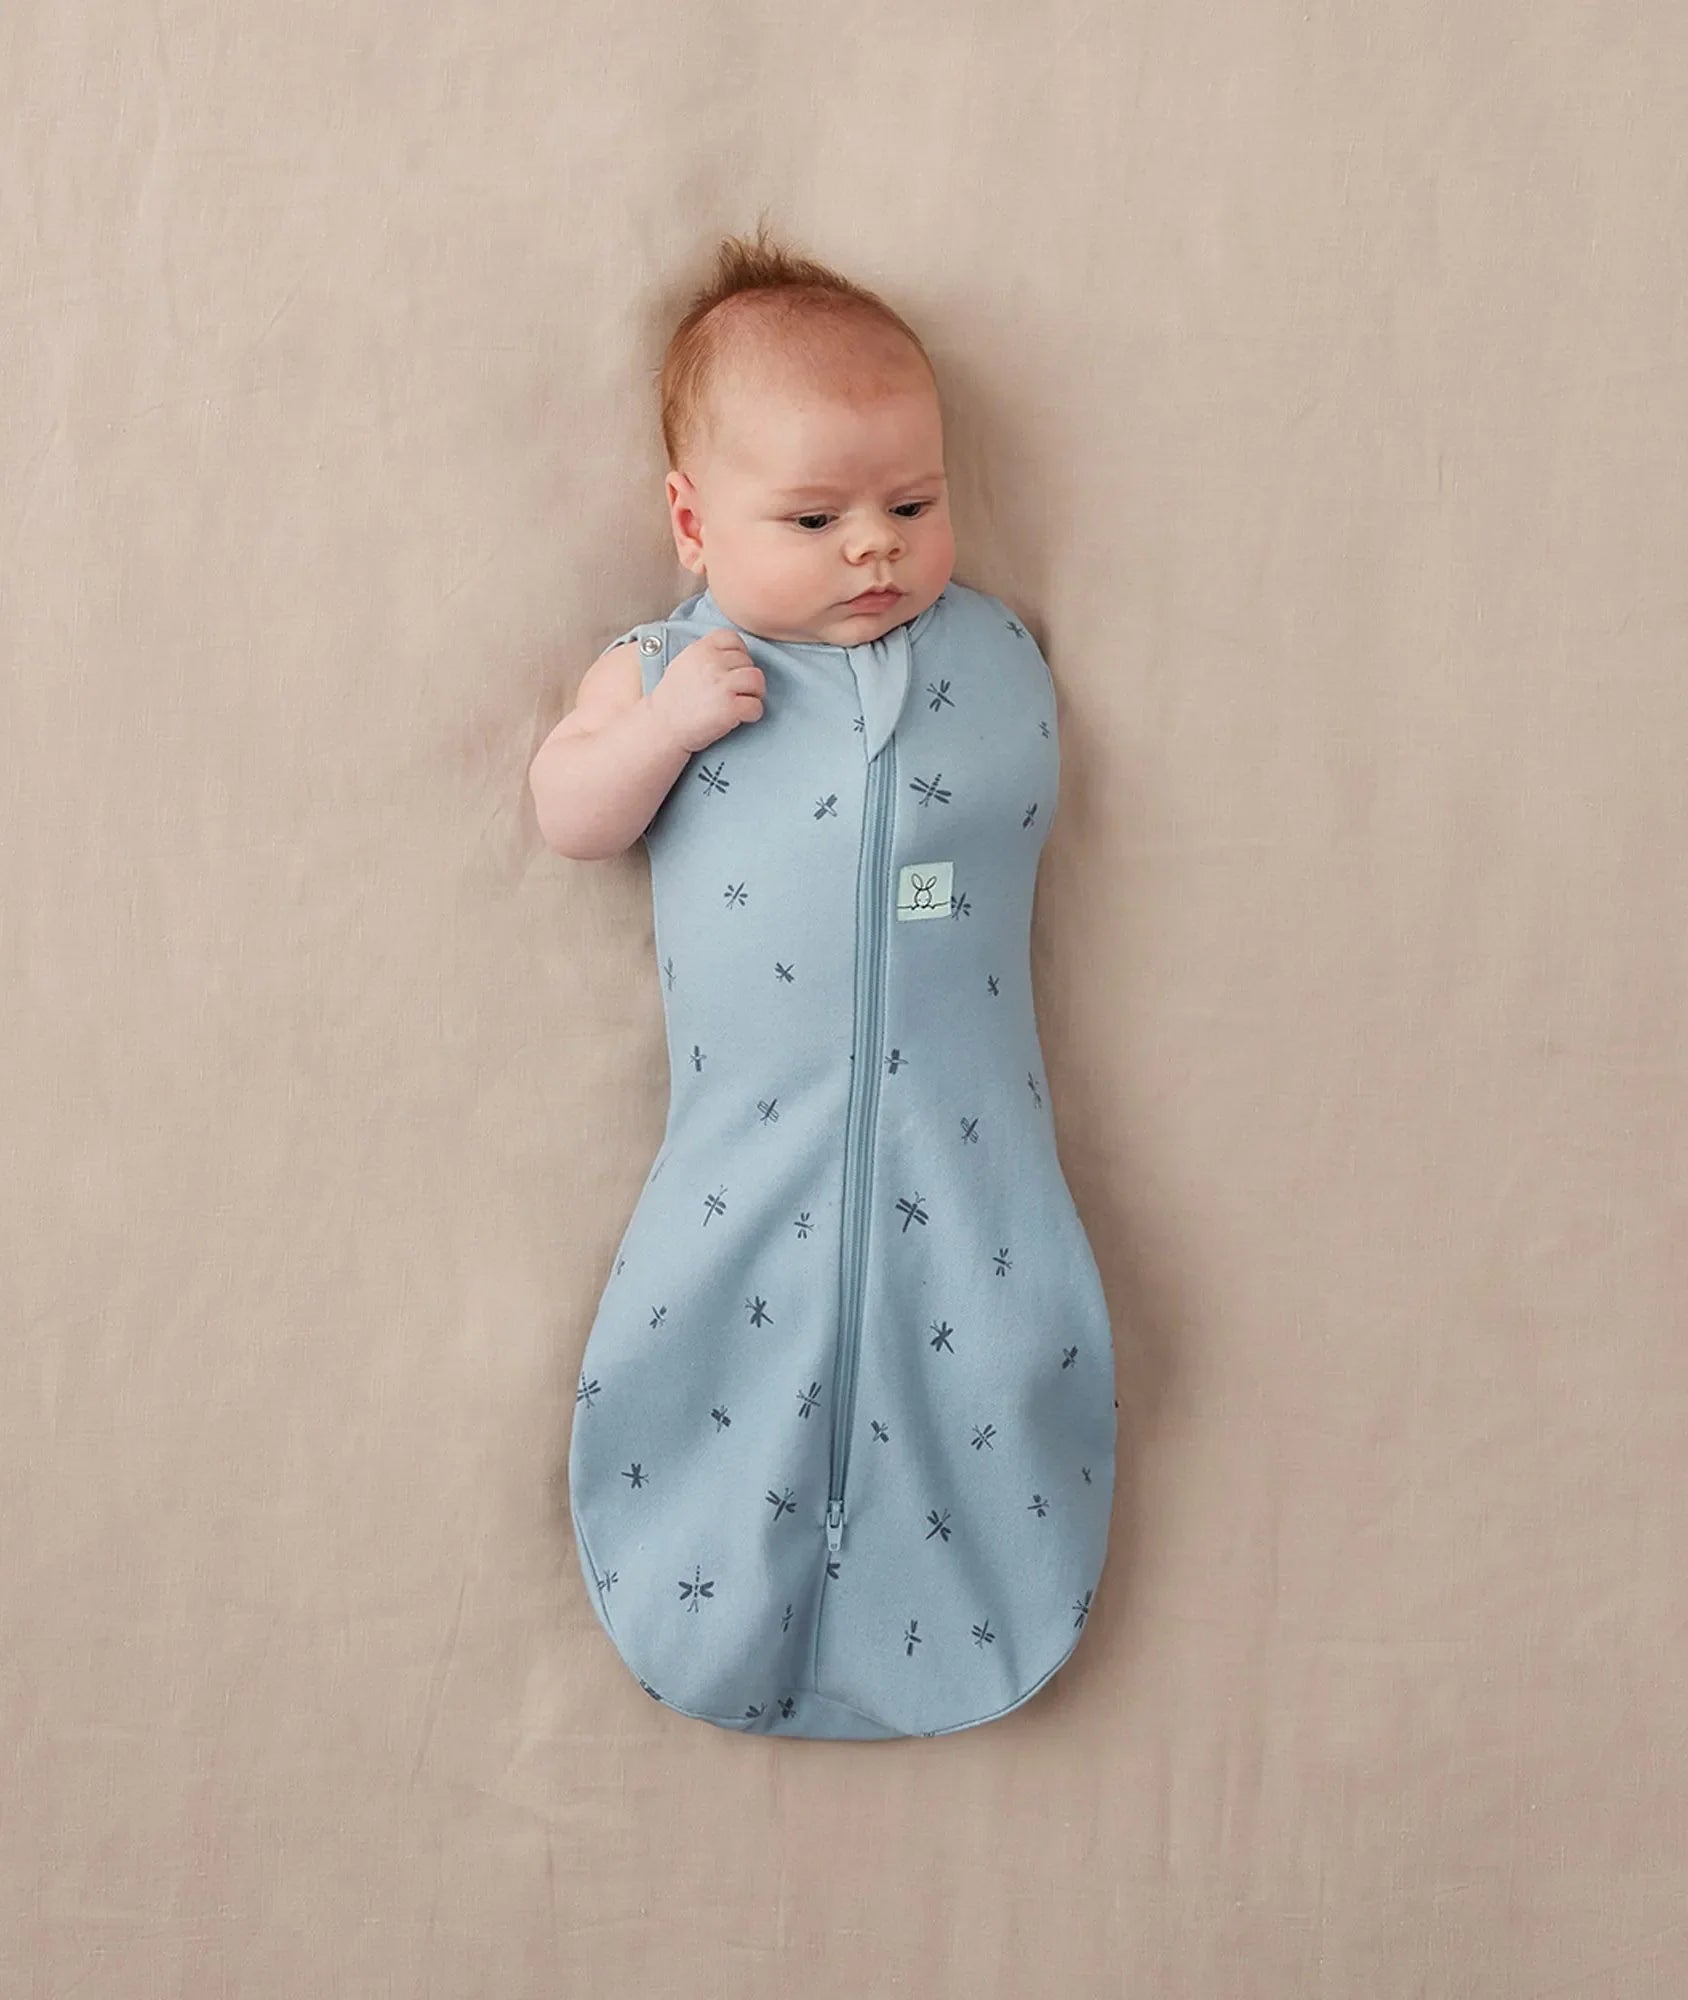 ErgoPouch Cocoon Swaddle Sack 1.0 TOG, Dragonflies